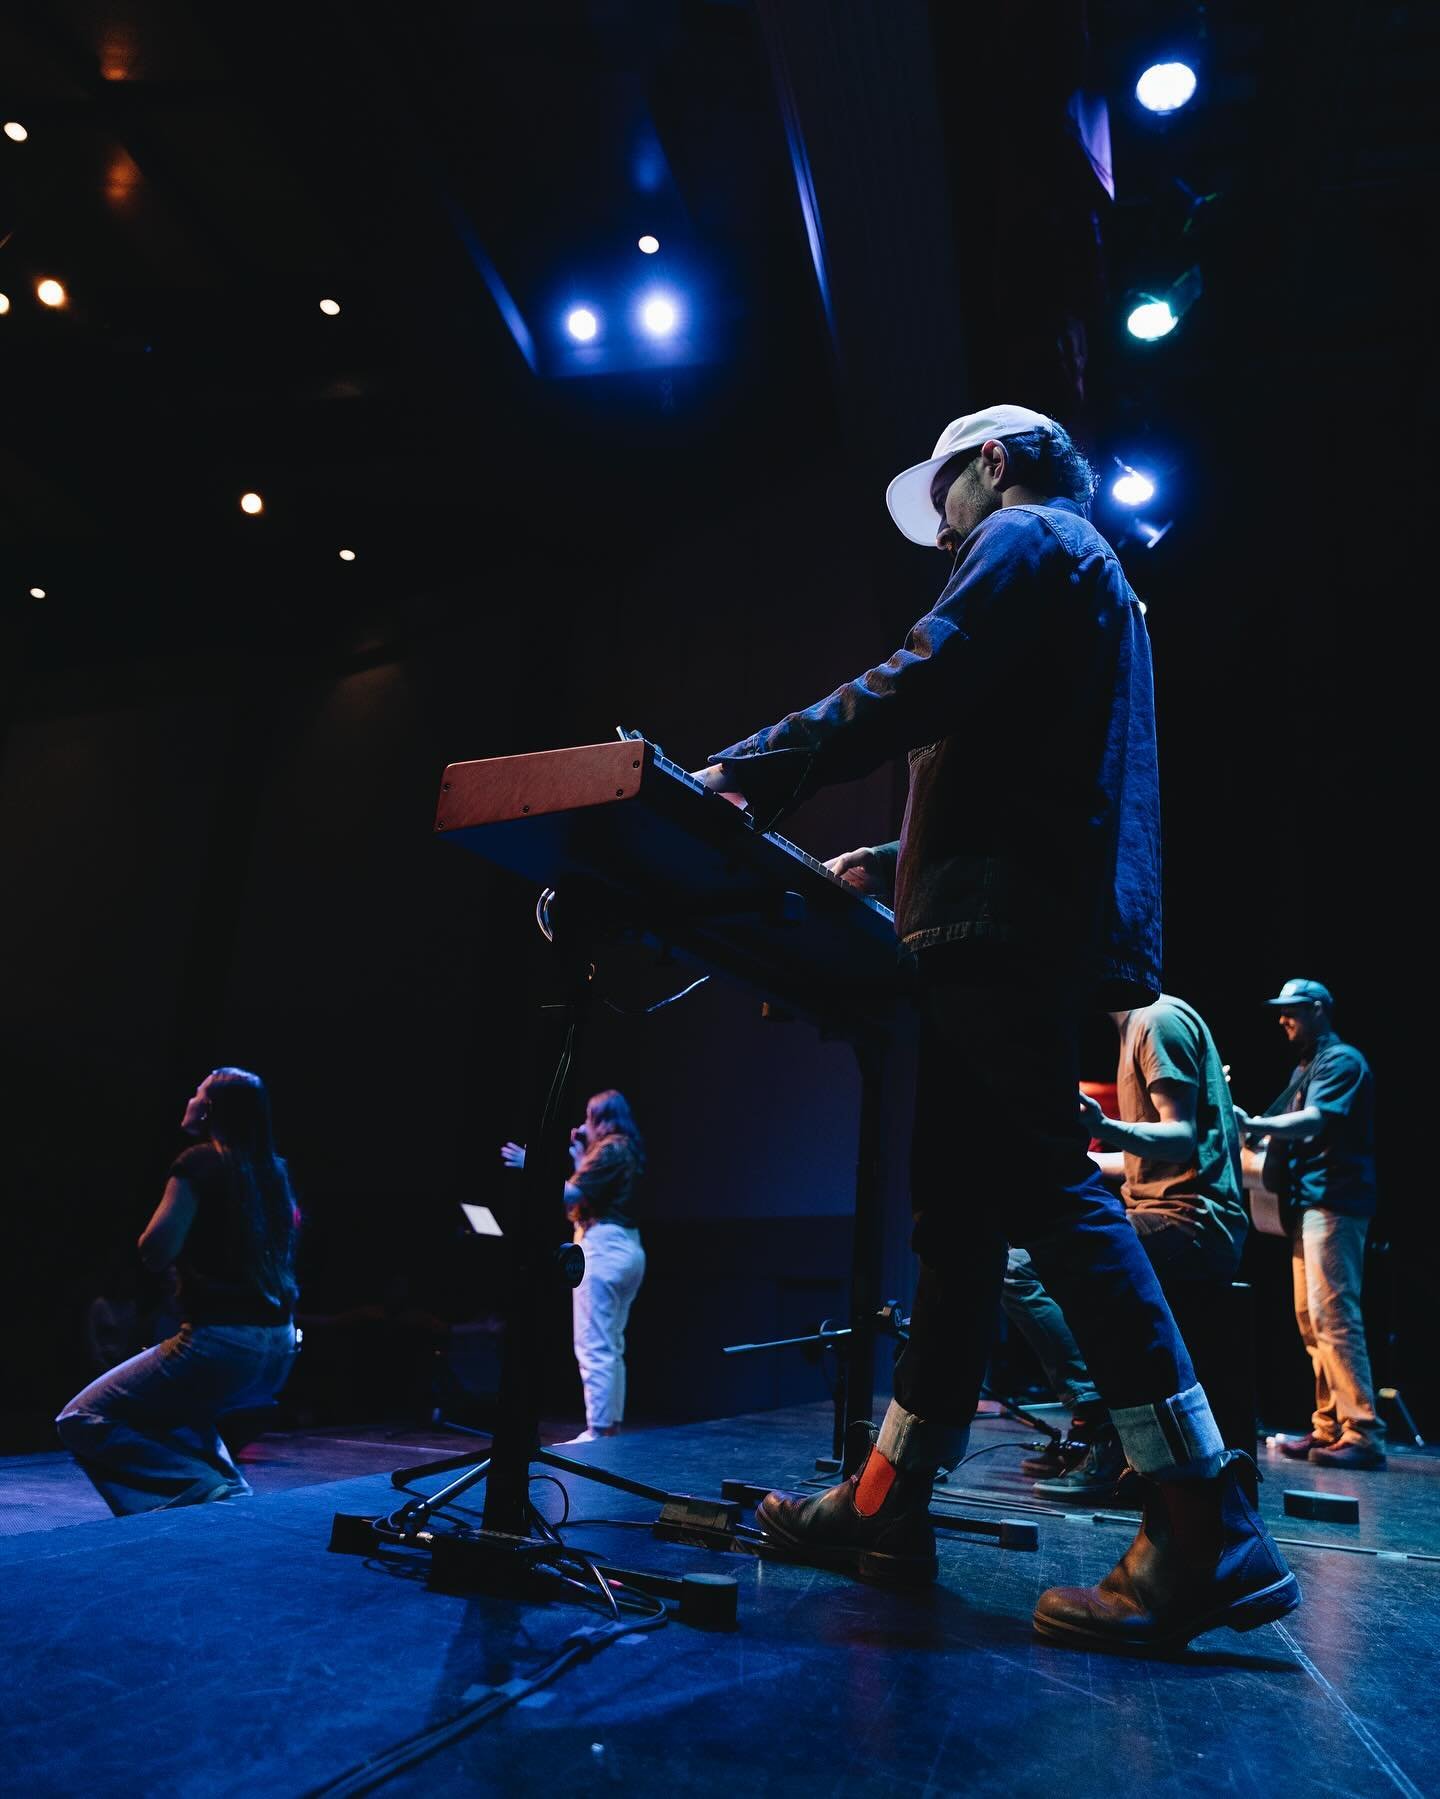 The Lord showed up Sunday! The Joy of the Lord hit each service and we left so full of His presence! 🕊️ 

We loved popping up for church at the historic Willson auditorium in downtown Bozeman and we are doing it all again this Sunday! 

Next up: Bre